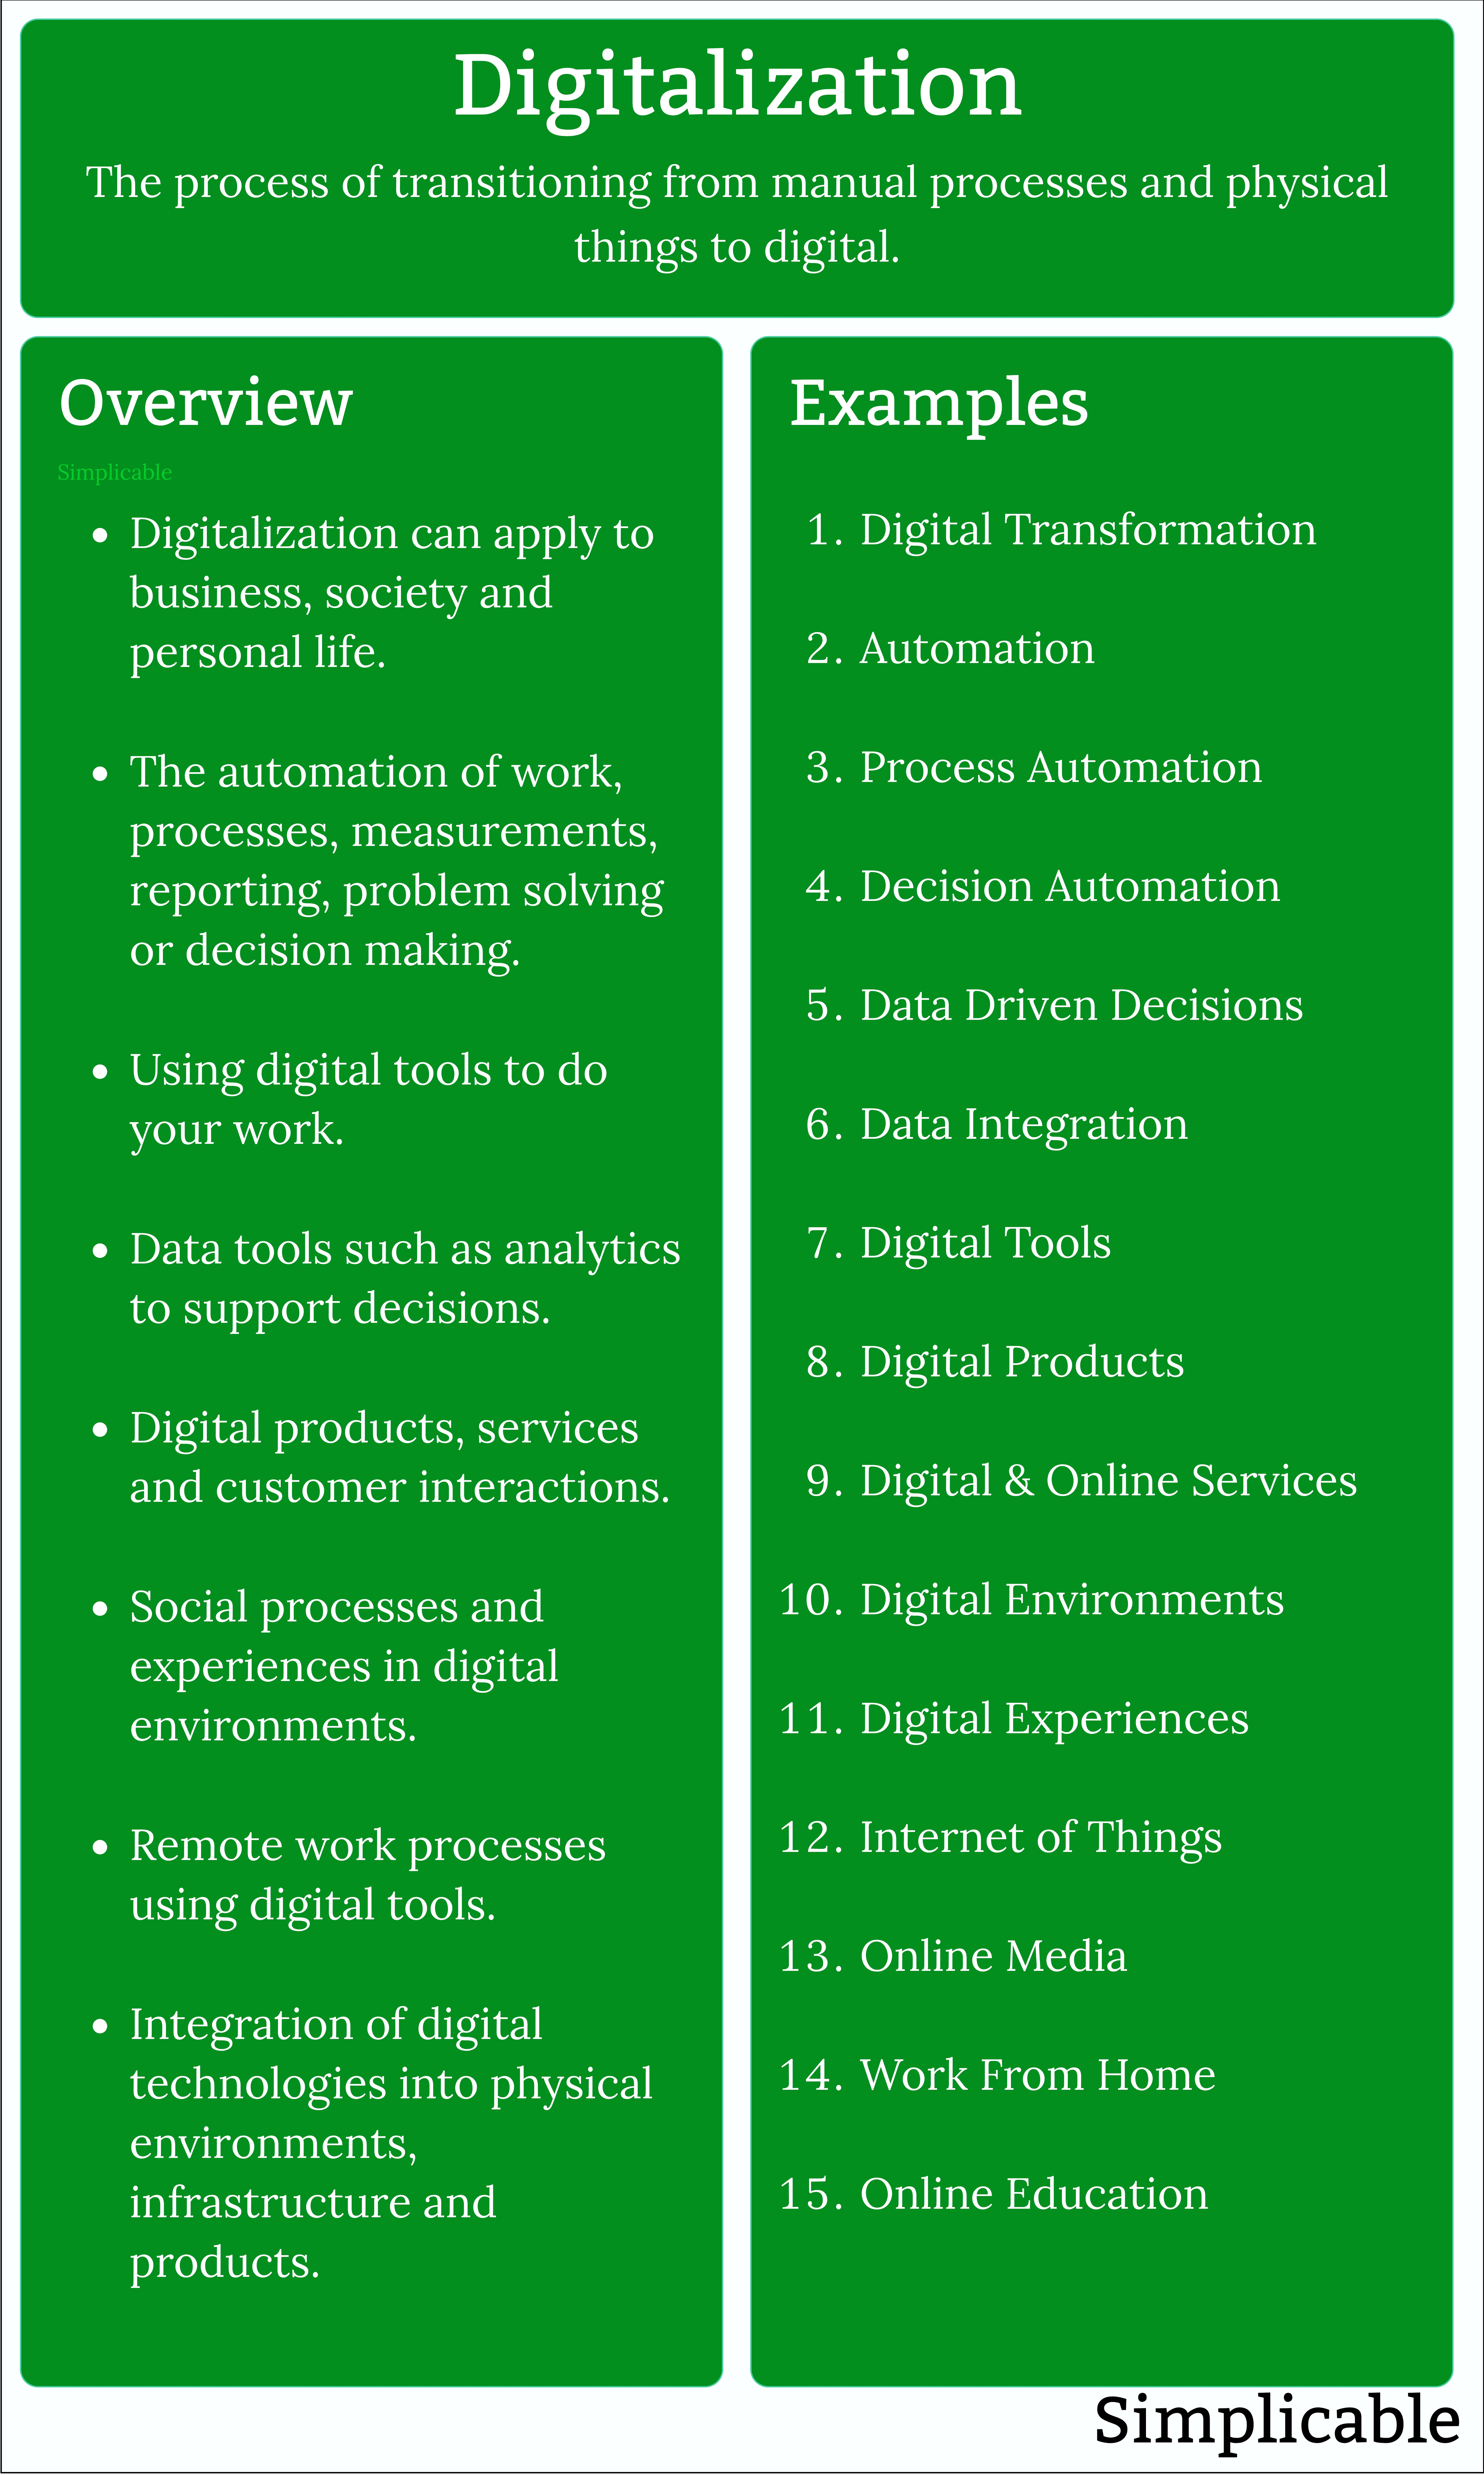 Digitalization overview and examples